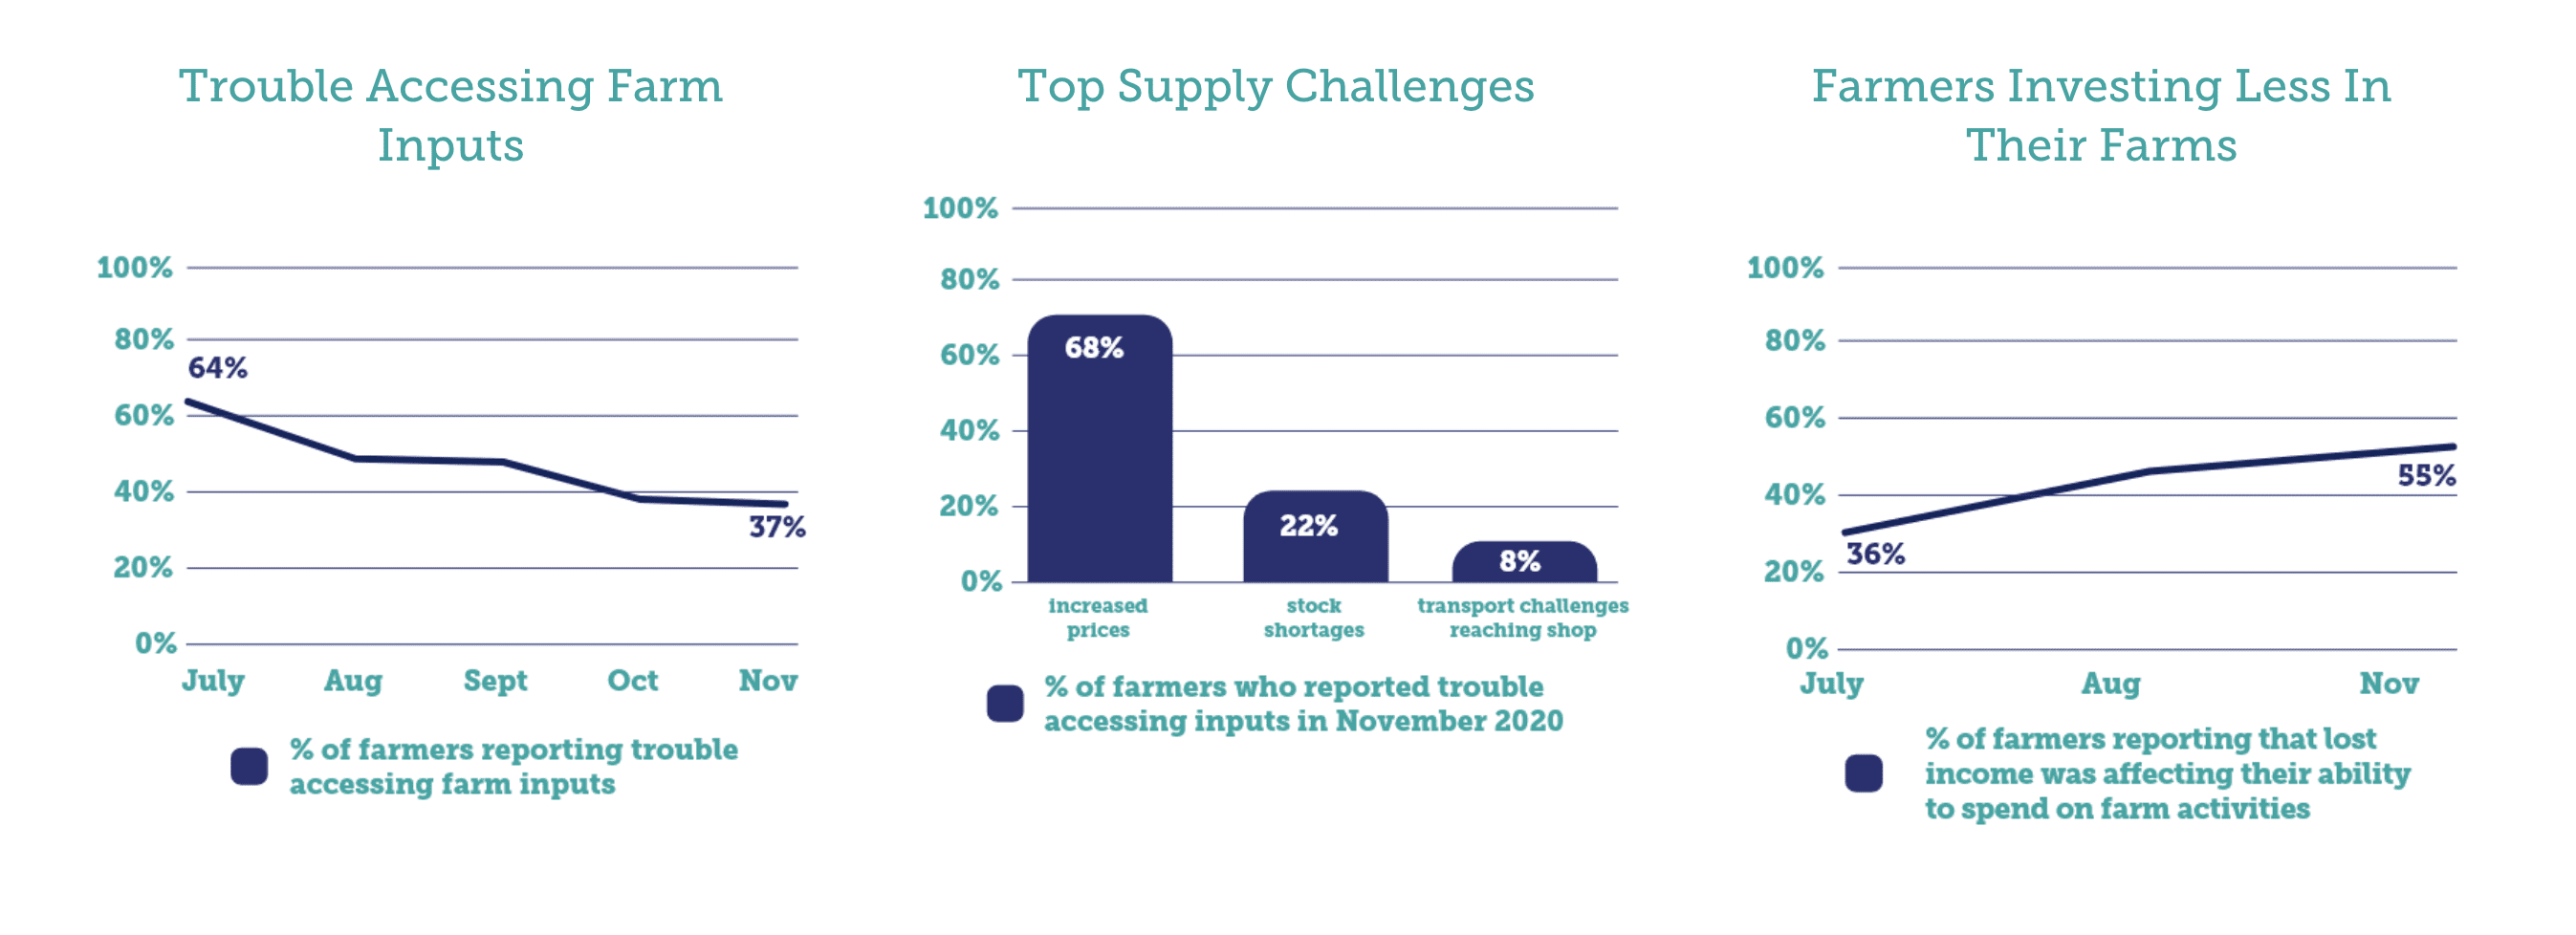 Charts show top supply challenges in commercial agriculture last year.